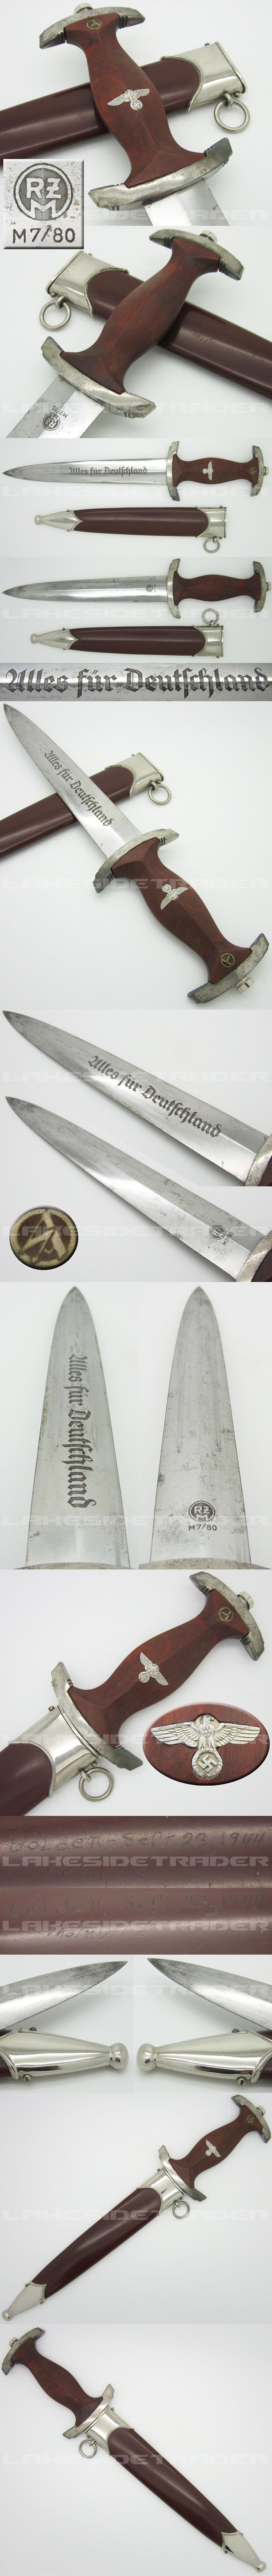 Personalized SA Dagger by RZM M7/80